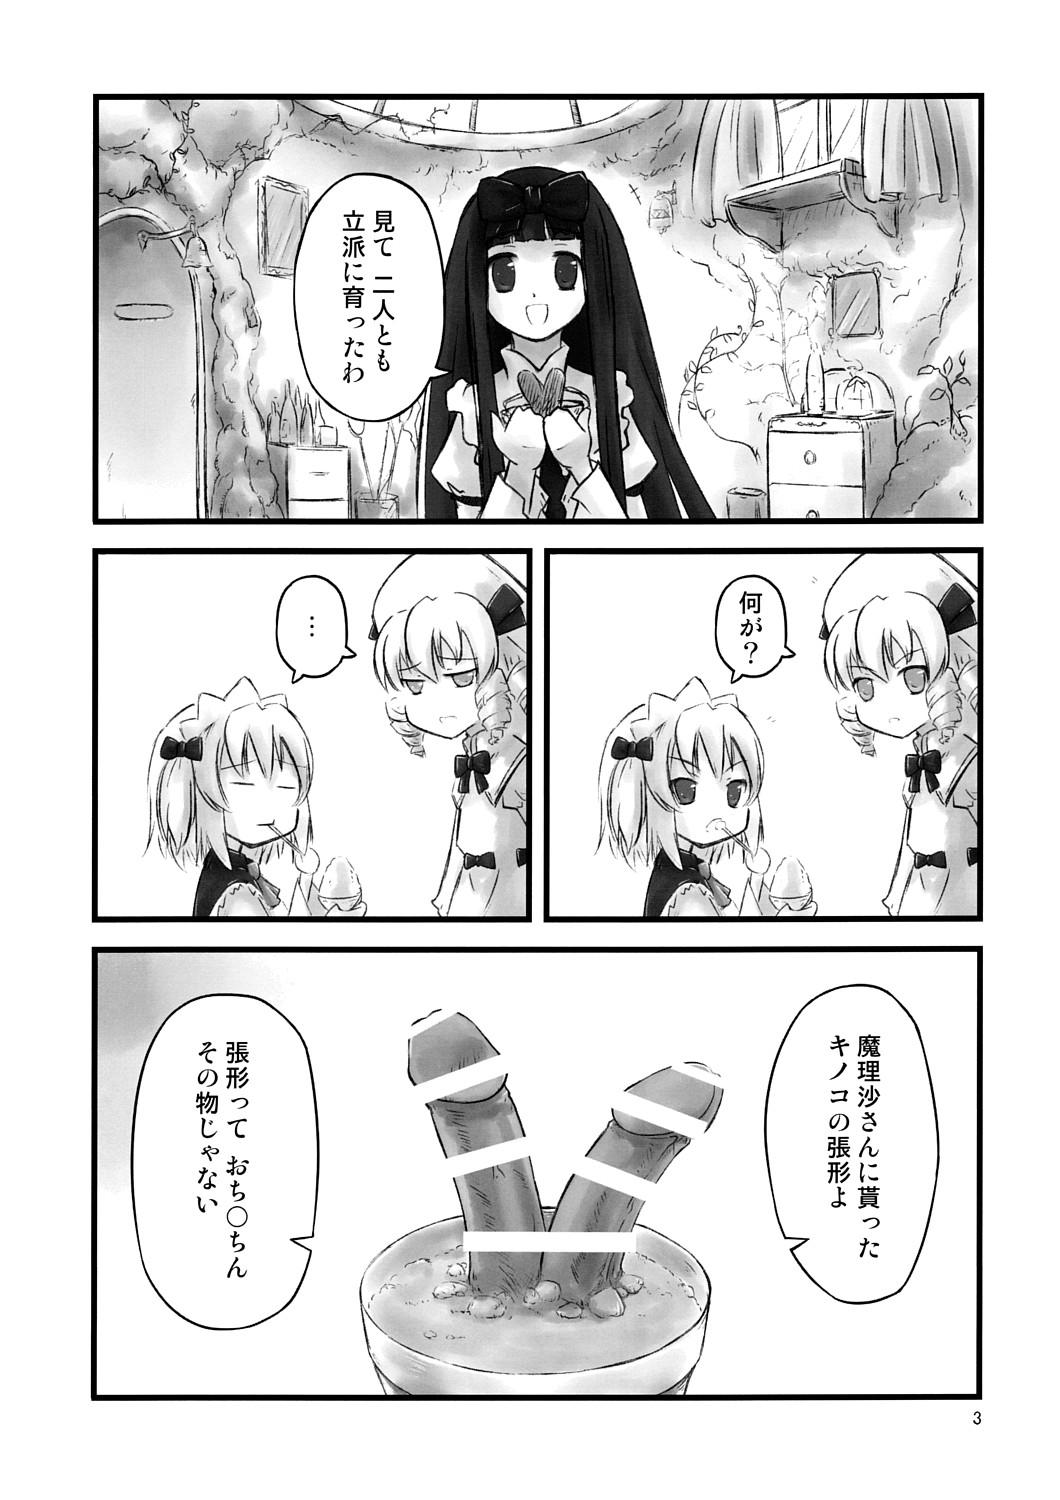 Butts cook off - Touhou project Stud - Page 2